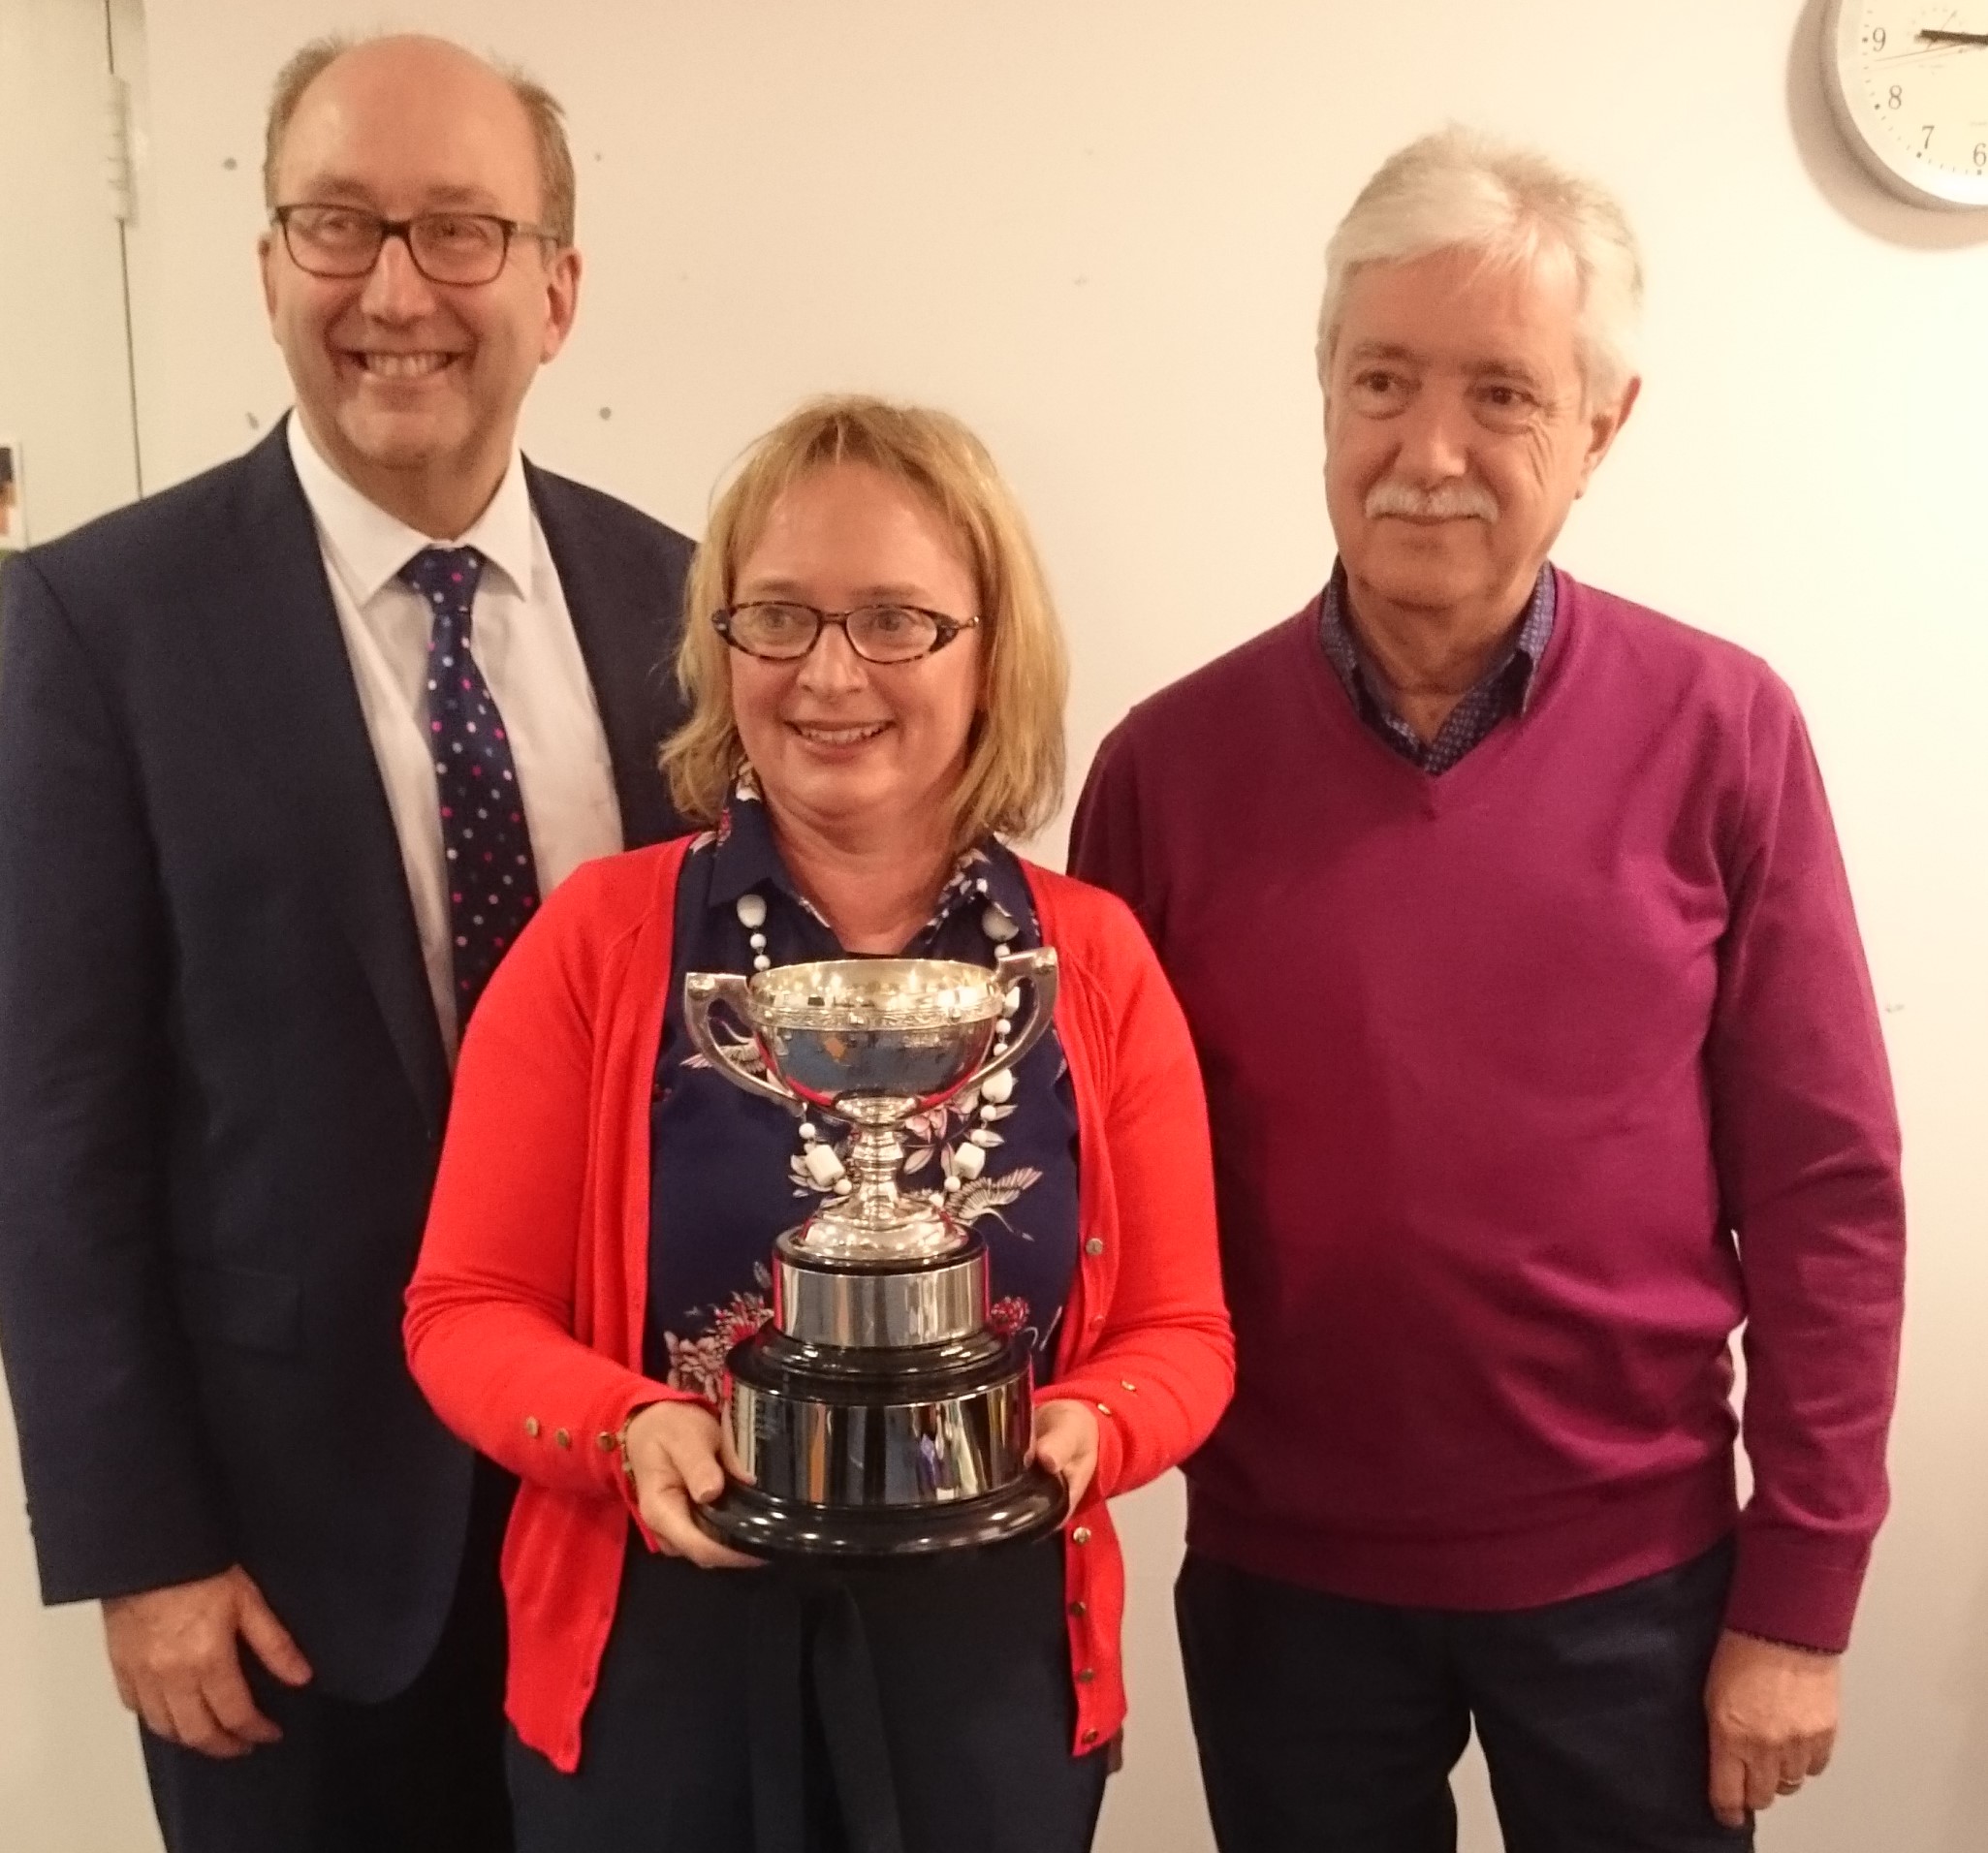 Club President Helena McGrath presenting the Cumann Cup to 2018 winners Gerald Kelly and Maurice Buckley